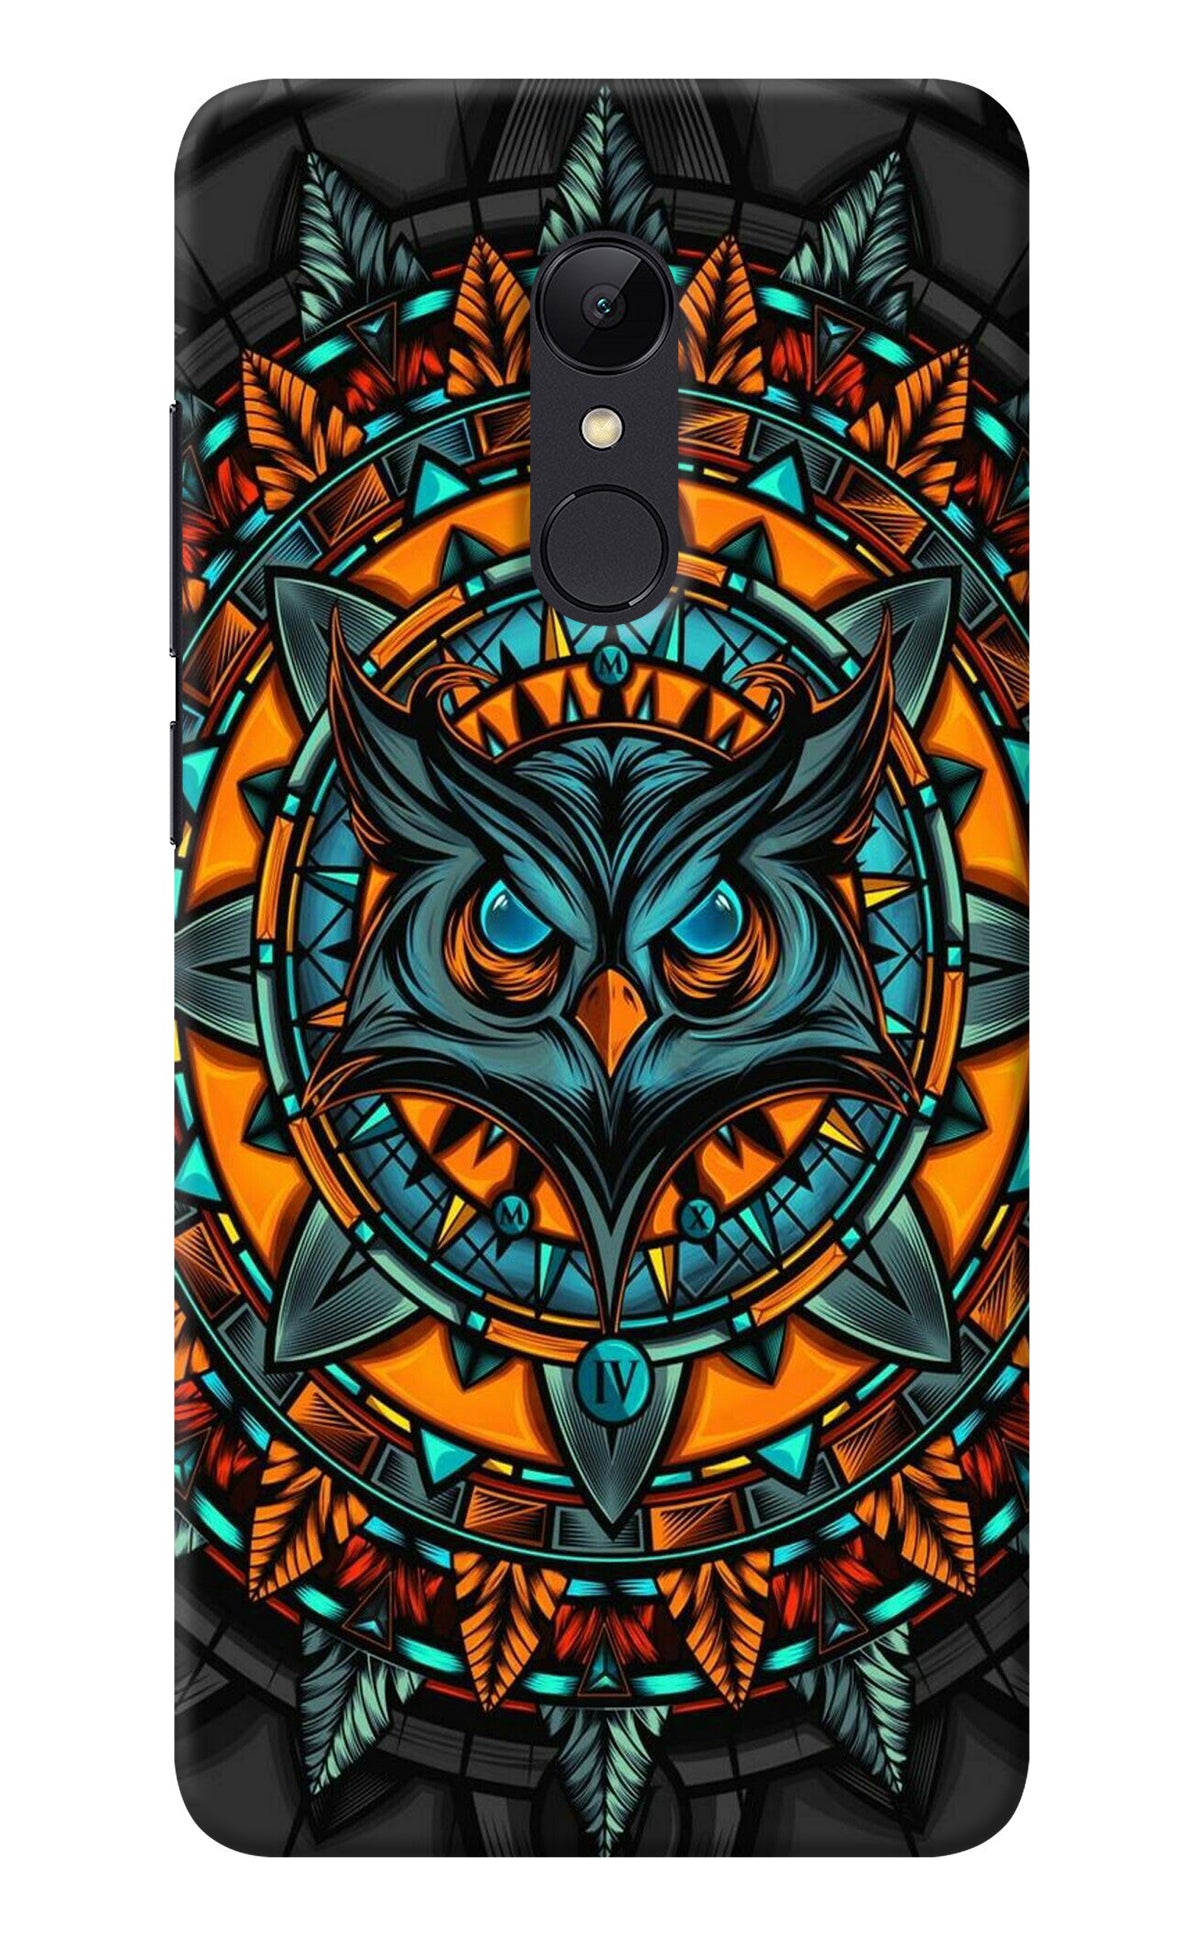 Angry Owl Art Redmi Note 4 Back Cover